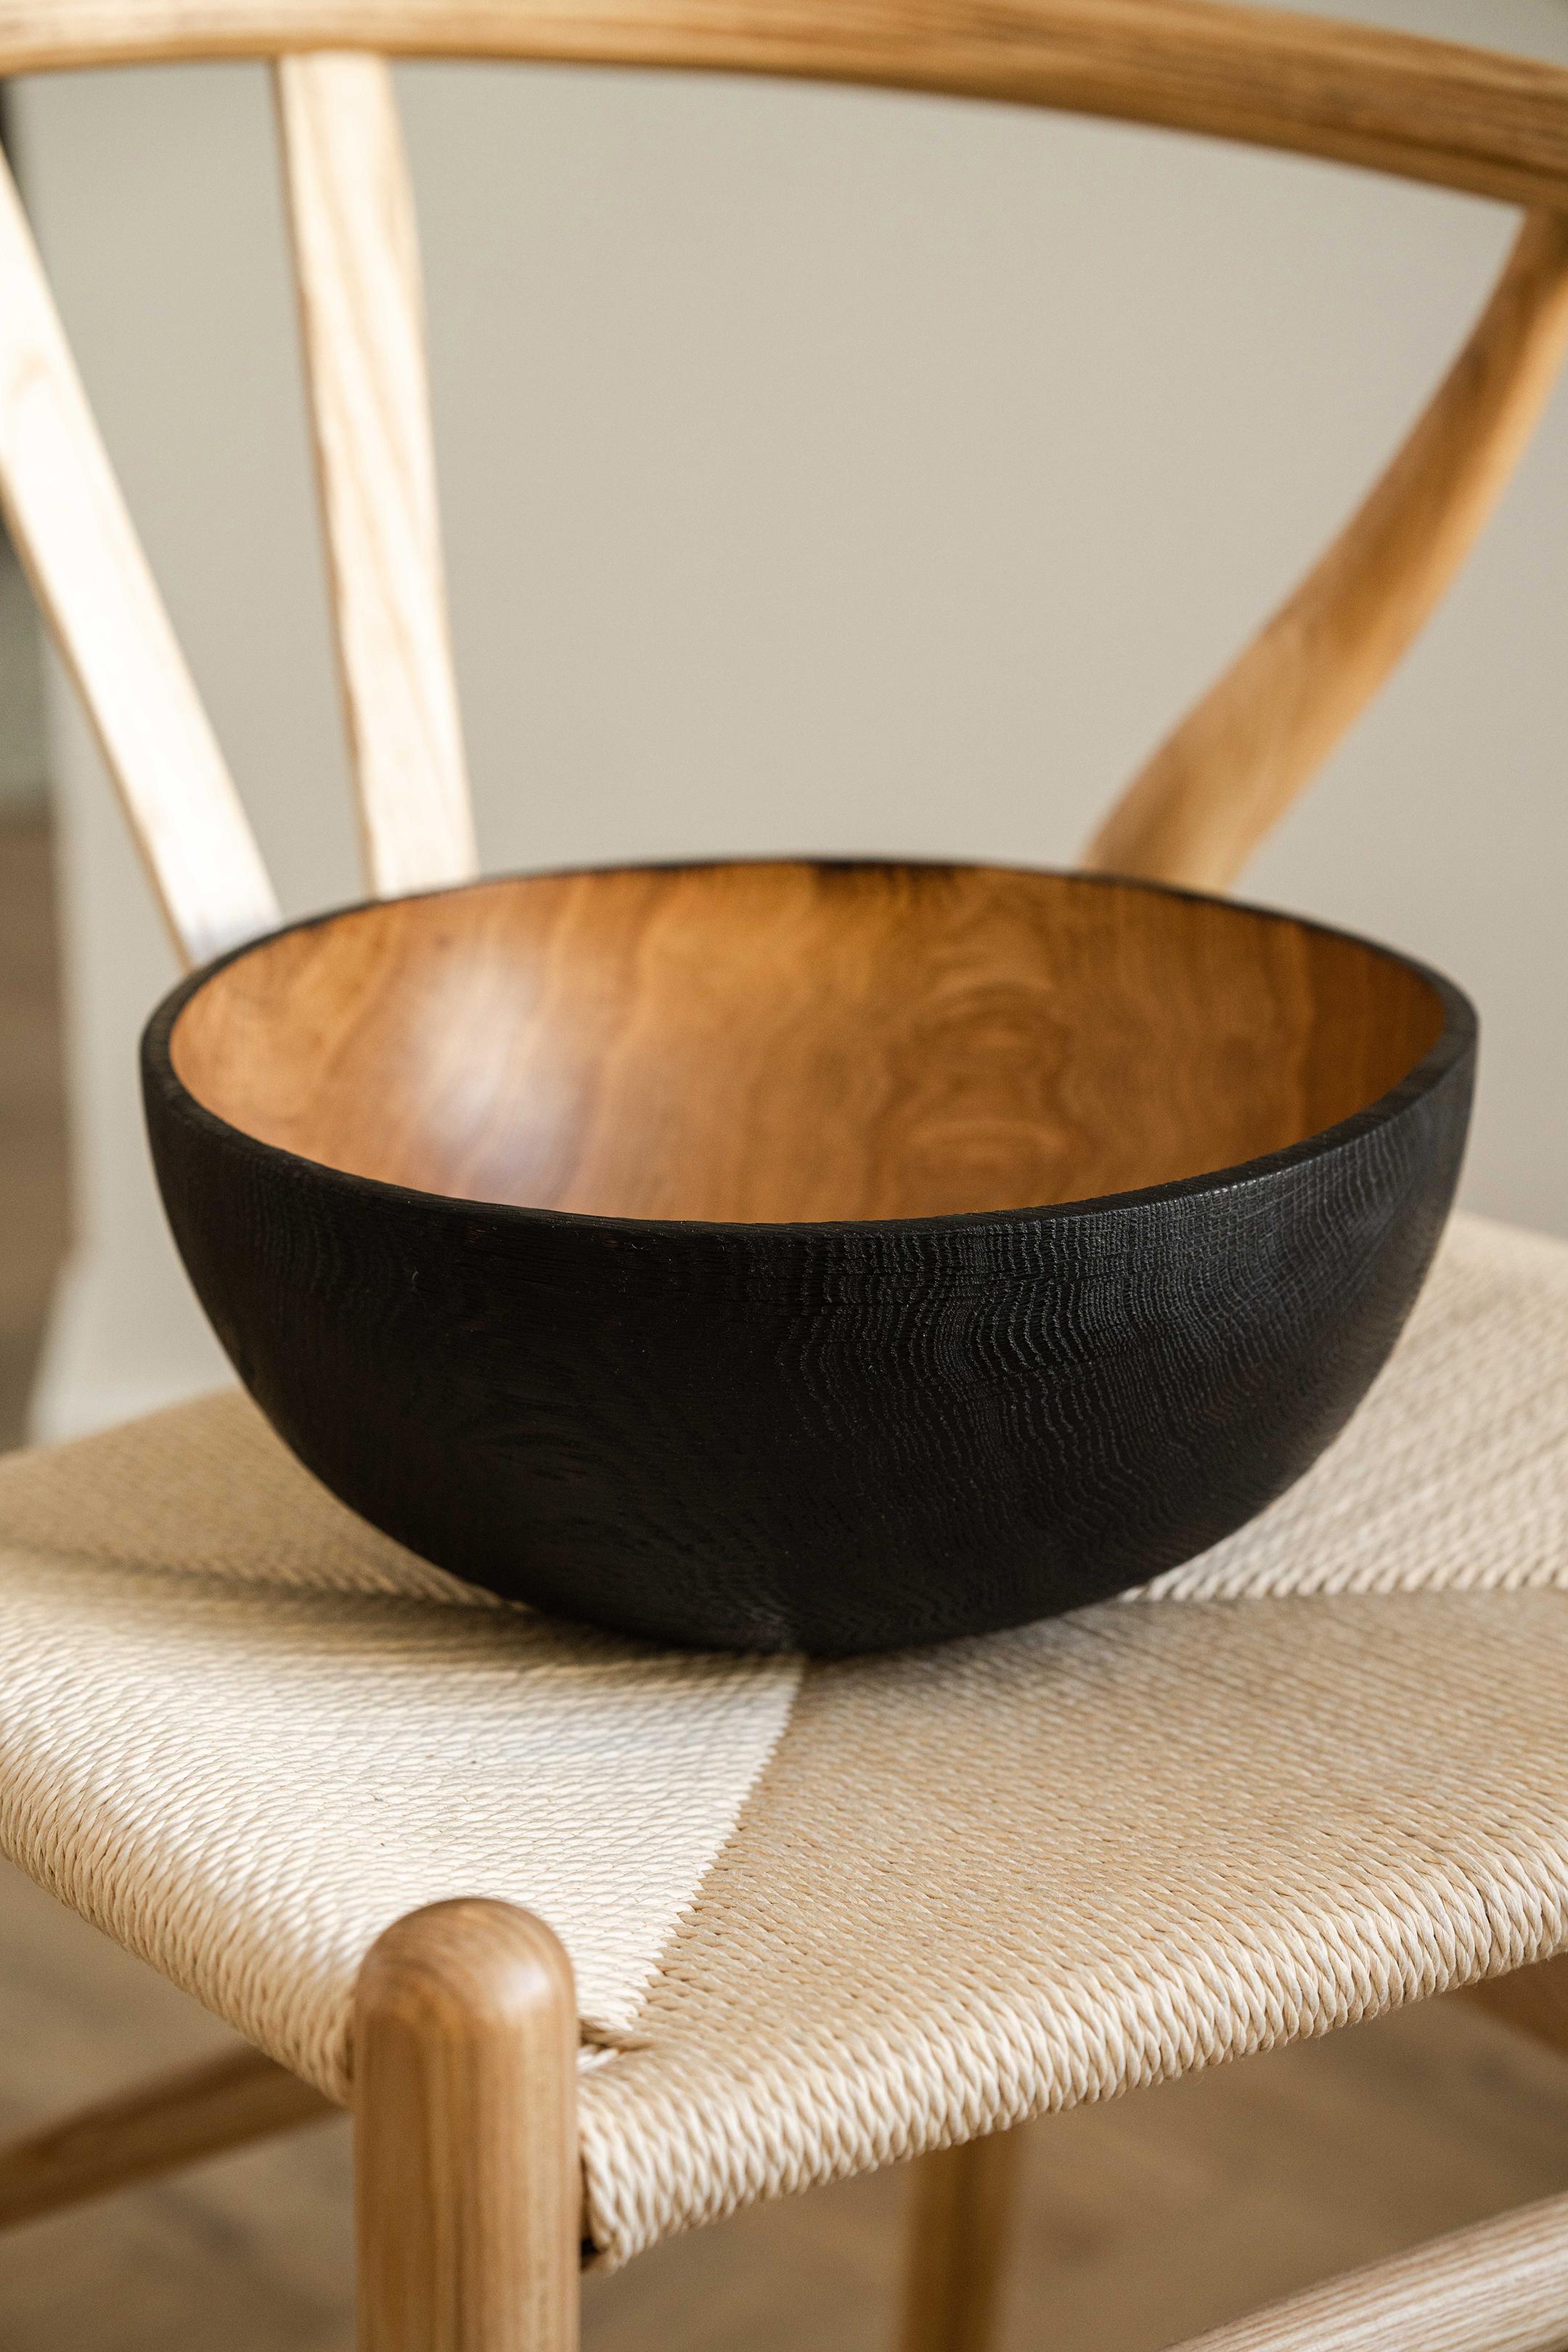 A large charred wood bowl will become a centerpiece on your table and a perfect vessel for all your fruits or vegetables in the kitchen. Hand-carved from one solid piece of wood charred on the outside to add this beautiful opaque black color and